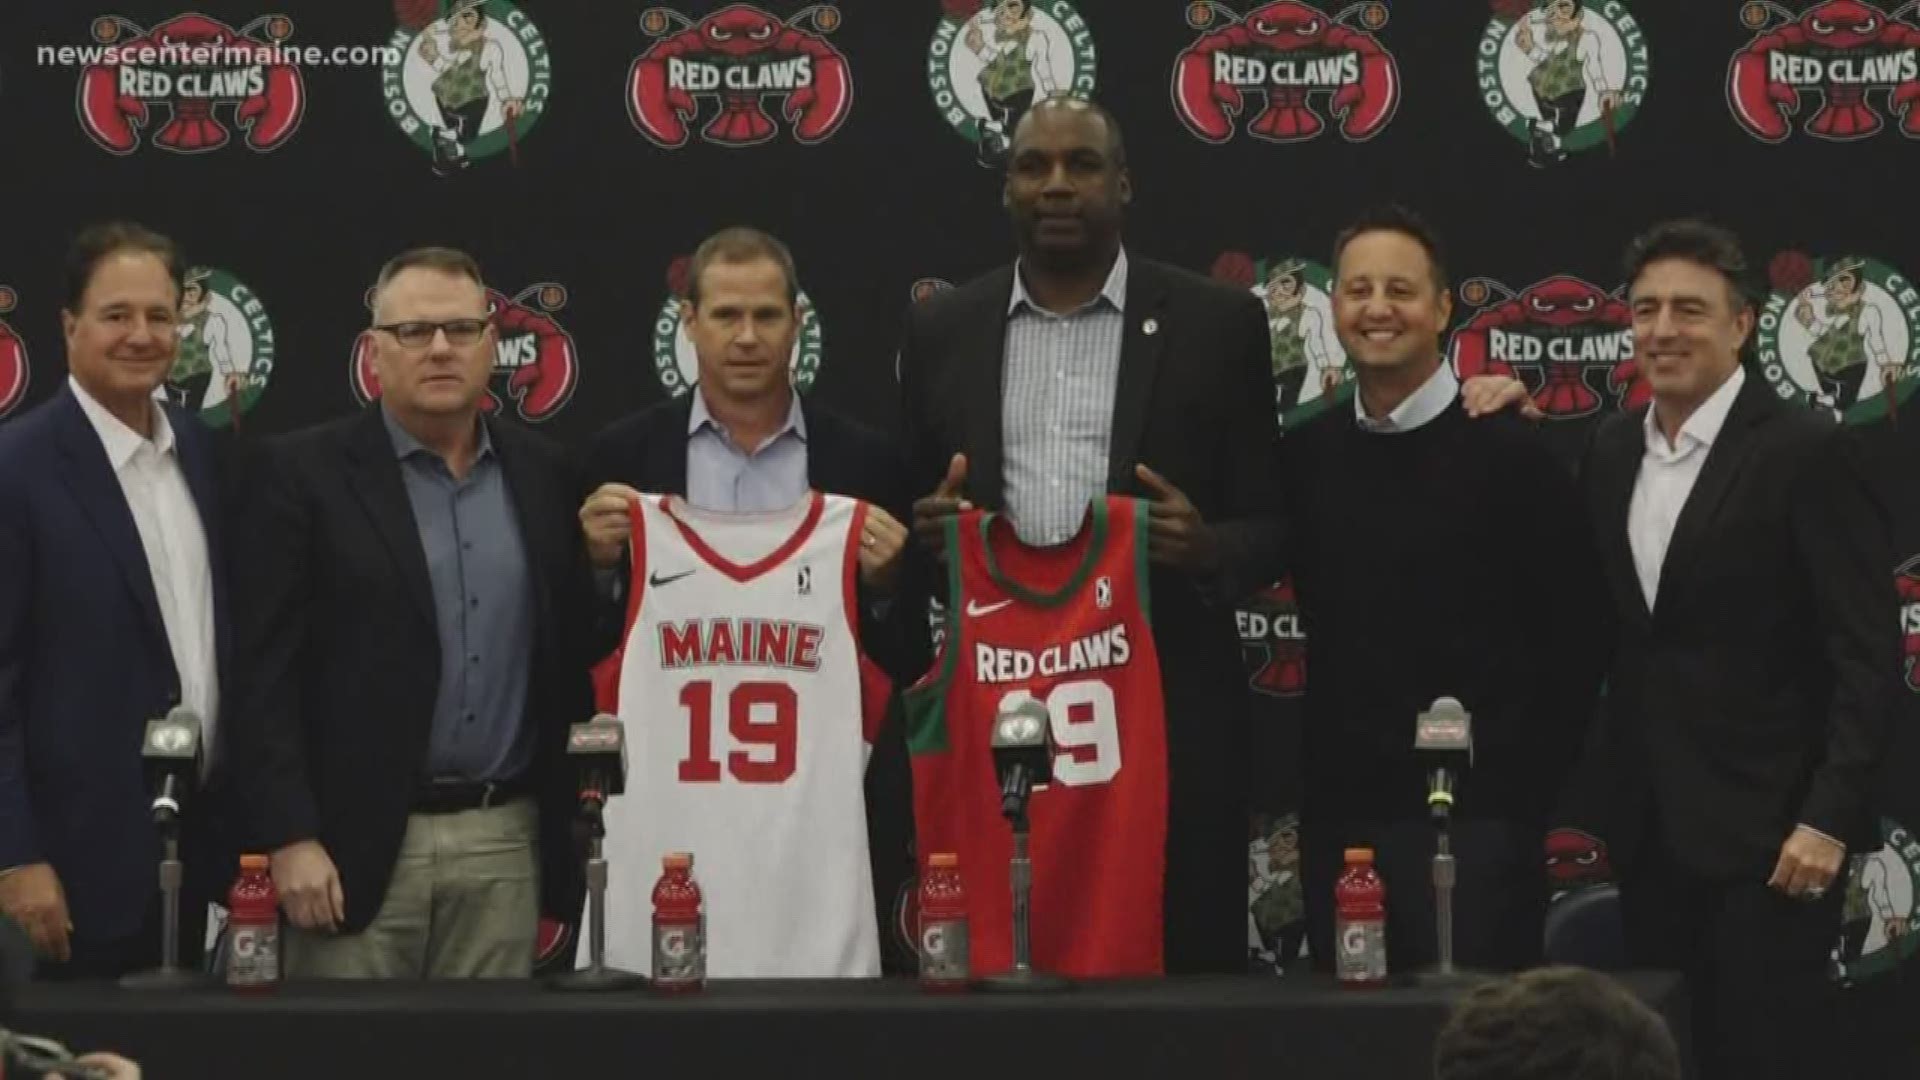 The Maine Red Claws will stay in Portland according to their new owners the Boston Celtics.